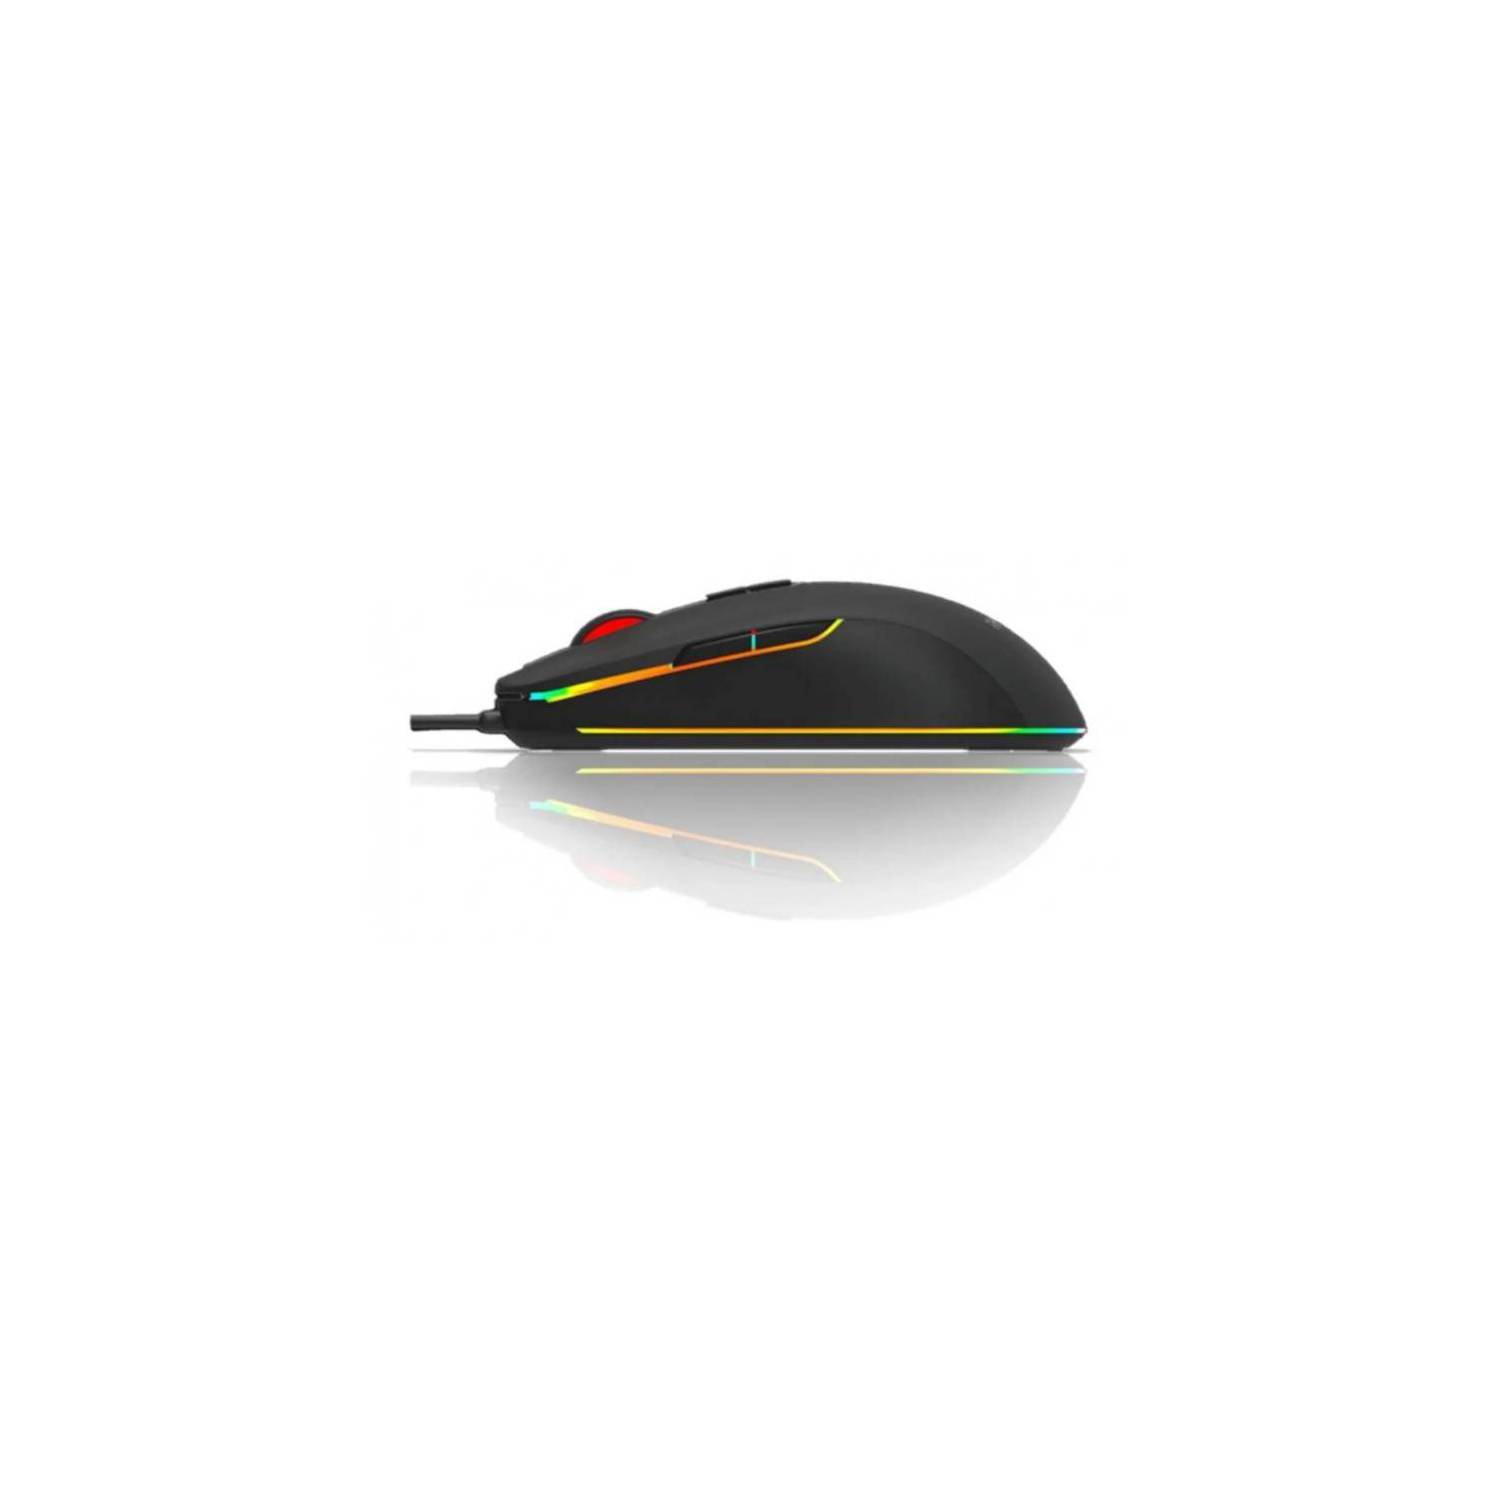 Mouse Gamer Philips 3200 DPI - Rgb